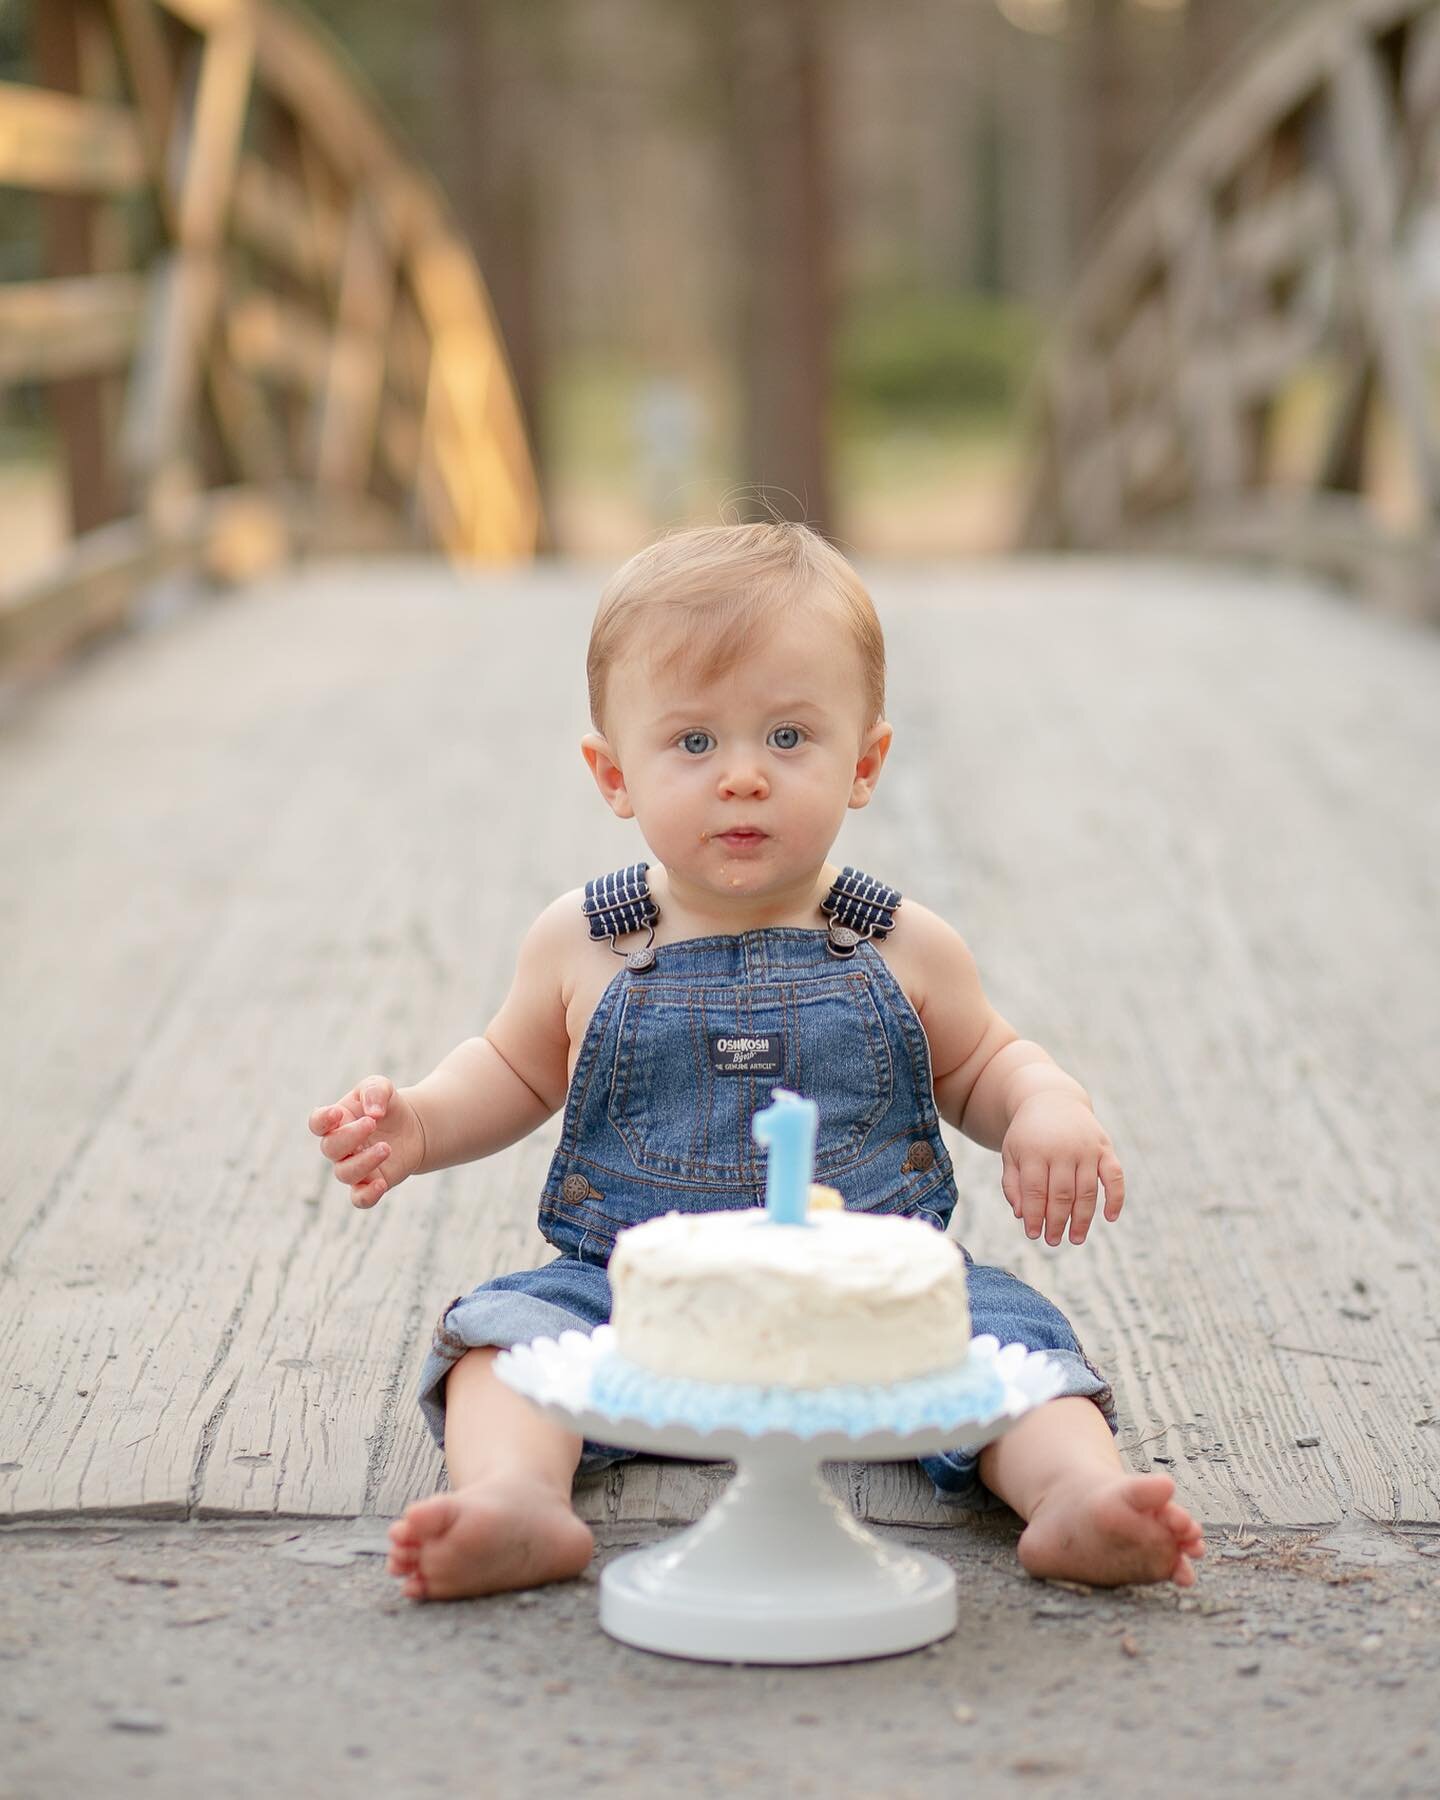 Liam was so gentle with his cake smash. It was the sweetest thing! 
&bull;
&bull;
&bull;
#lifestylephotography #cakesmashsession #photography #photooftheday #toddlerlife #instagood #photoshoot